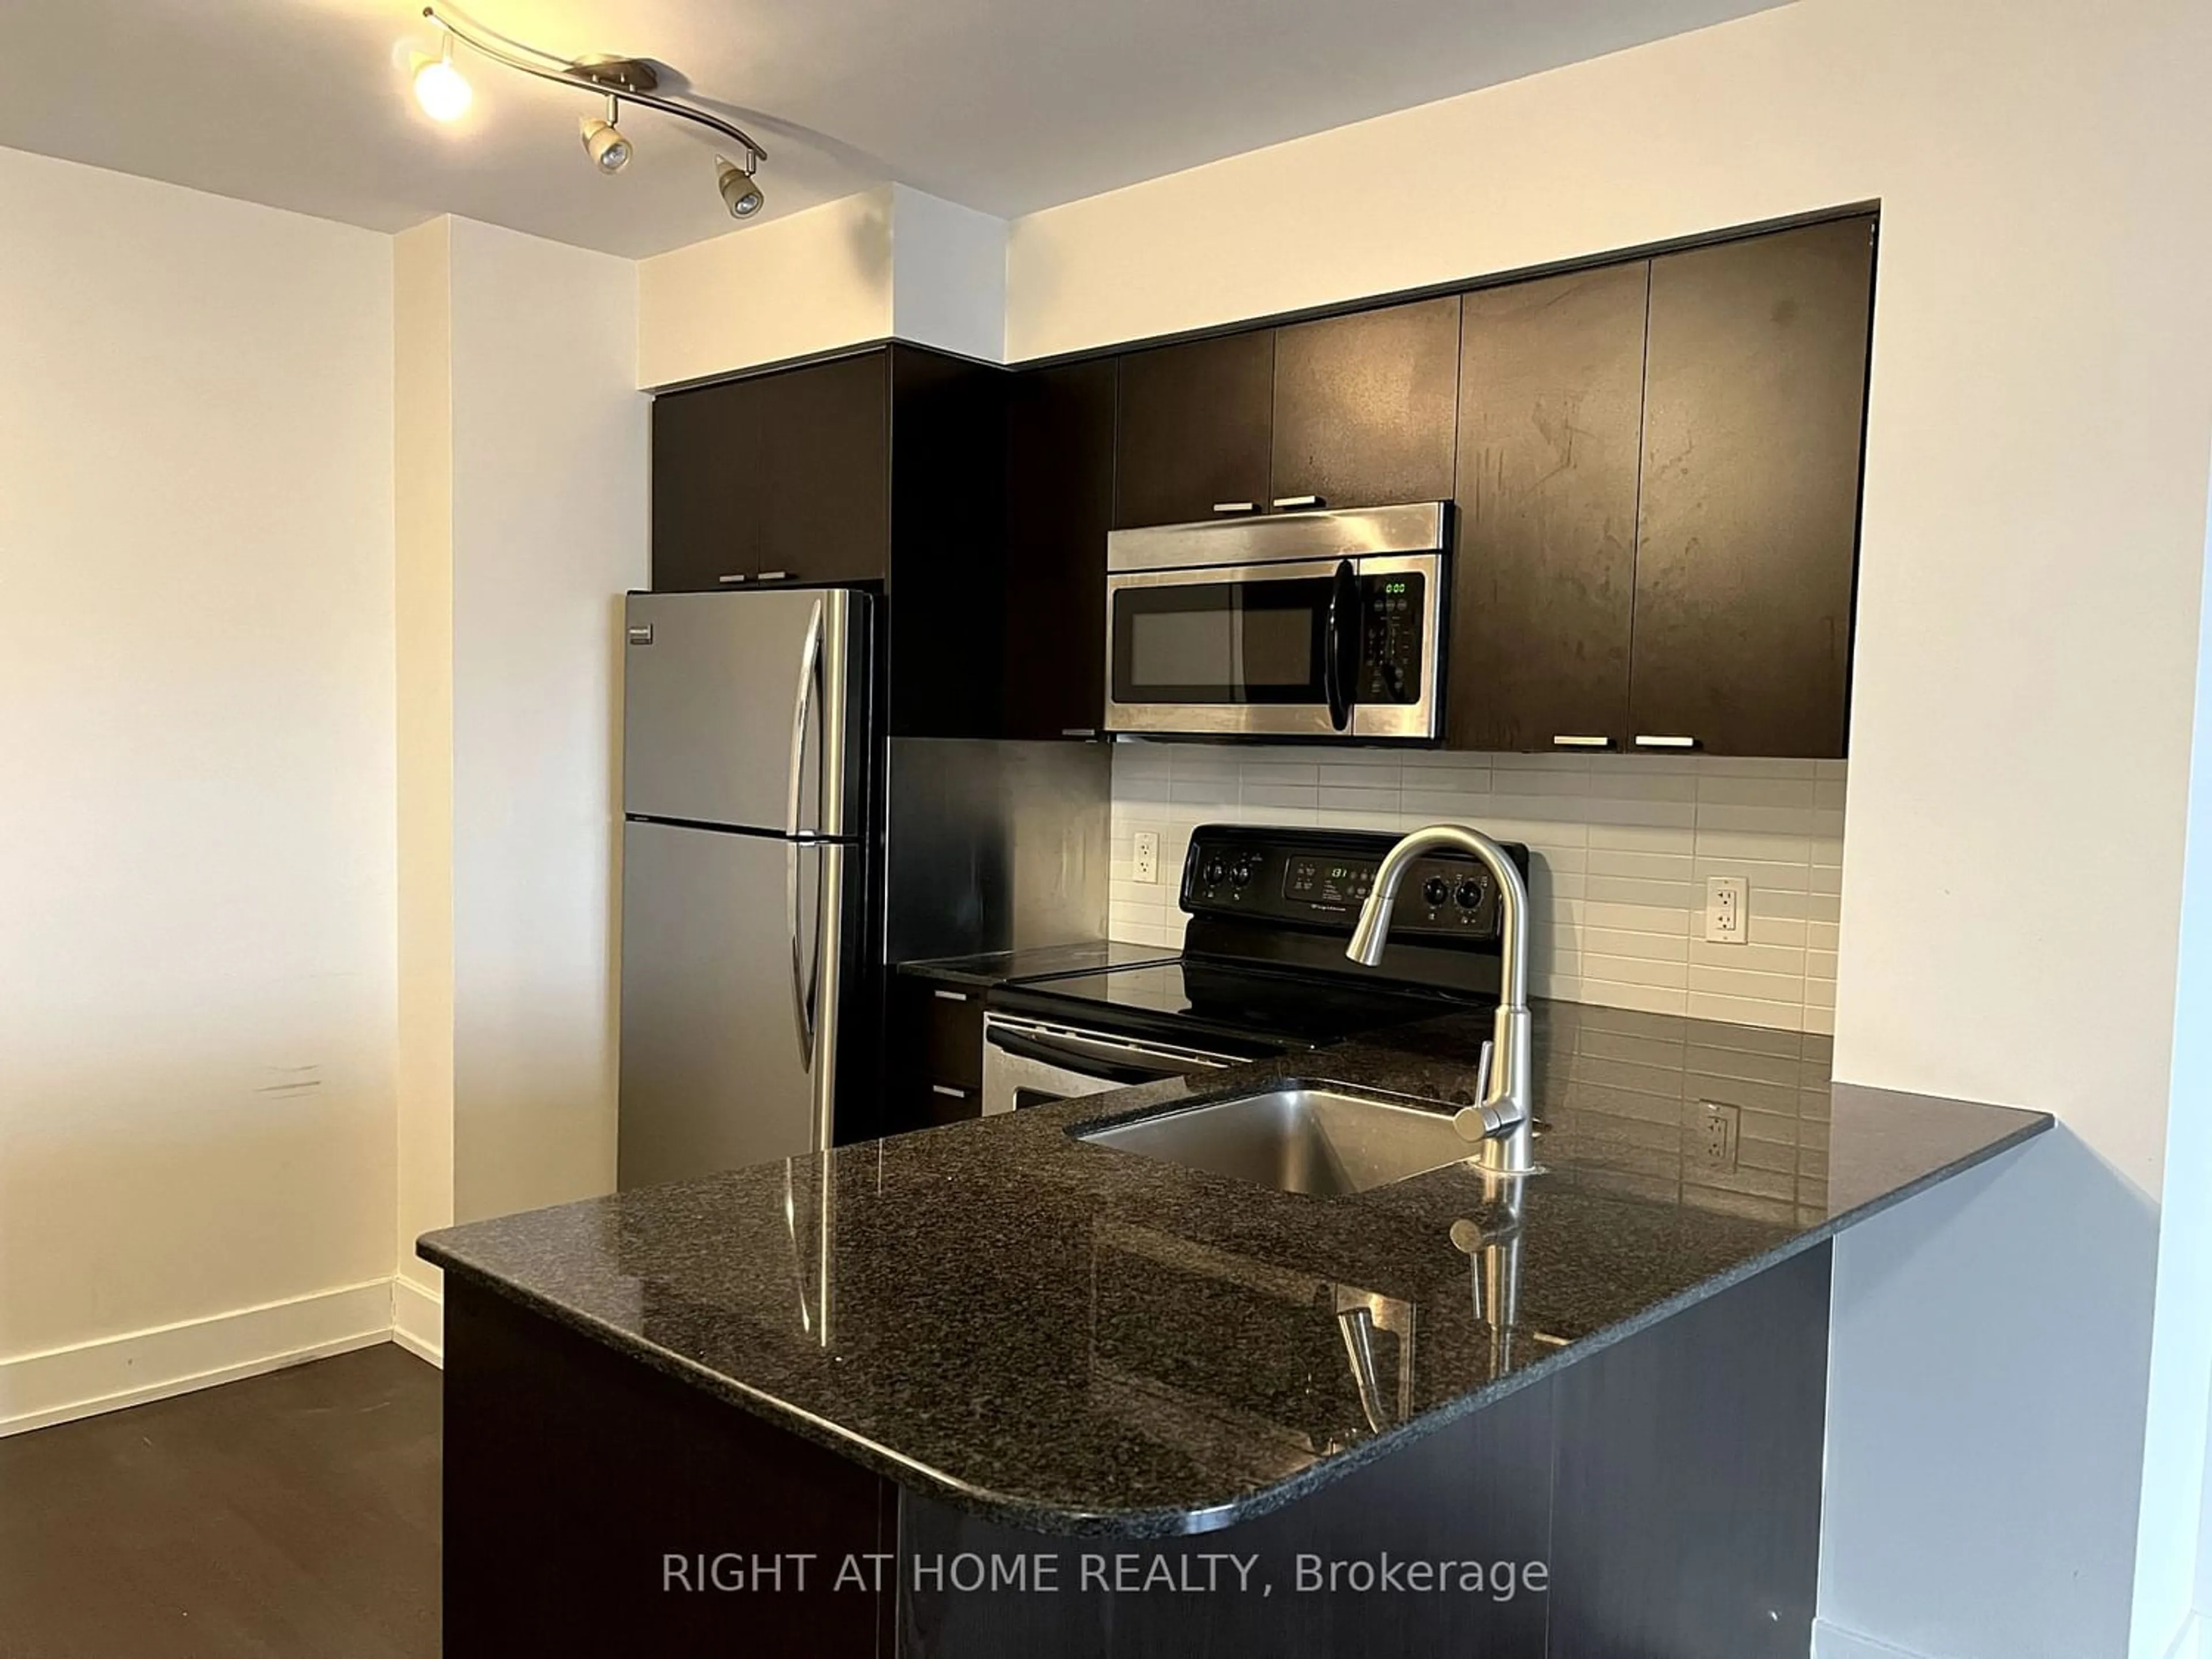 Standard kitchen for 23 Sheppard Ave #1606, Toronto Ontario M2N 0C8